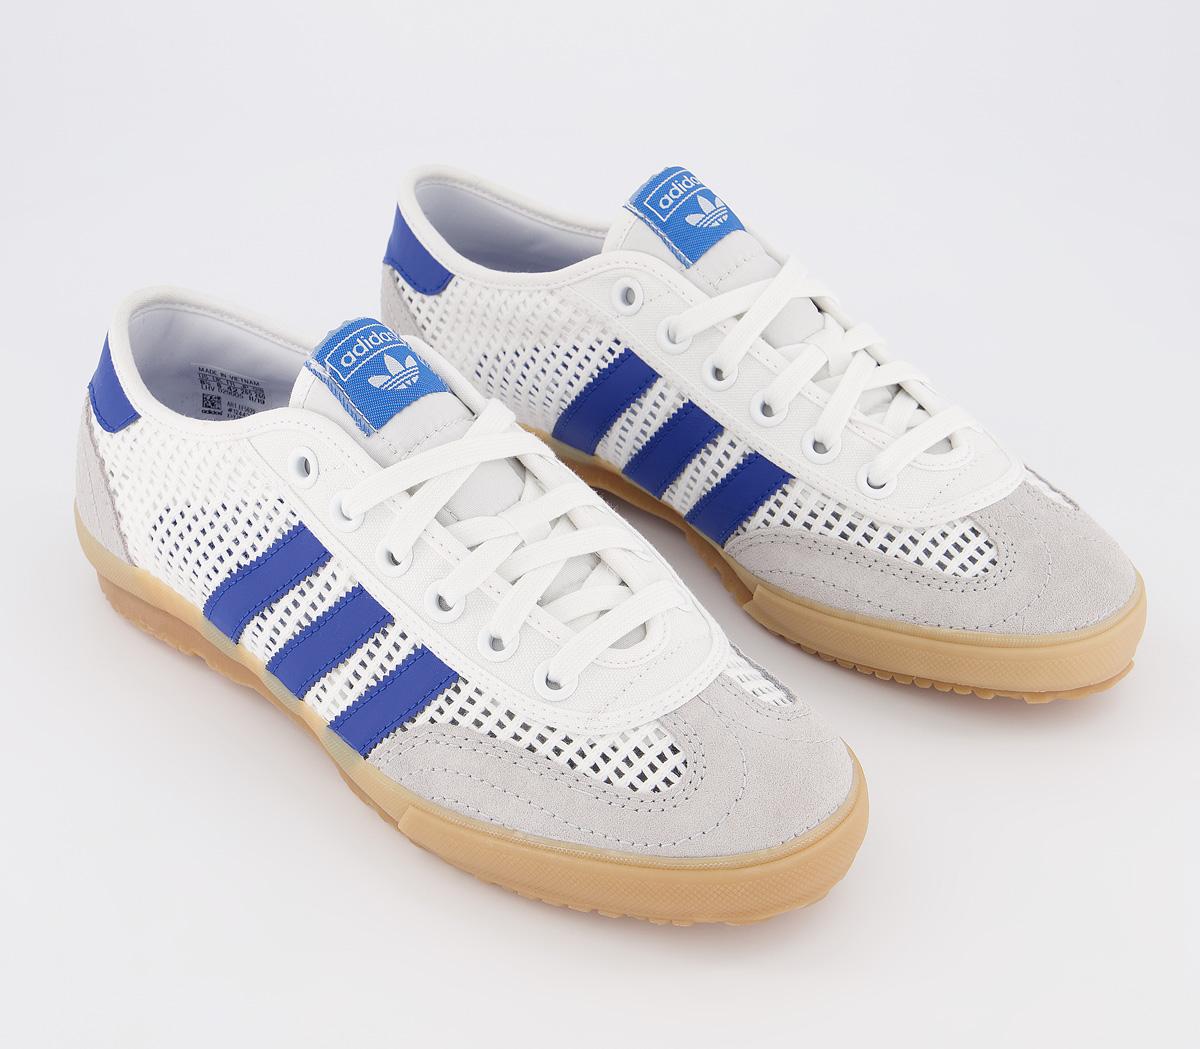 adidas Tischtennis Trainers White Grey Two Royal Blue - His trainers